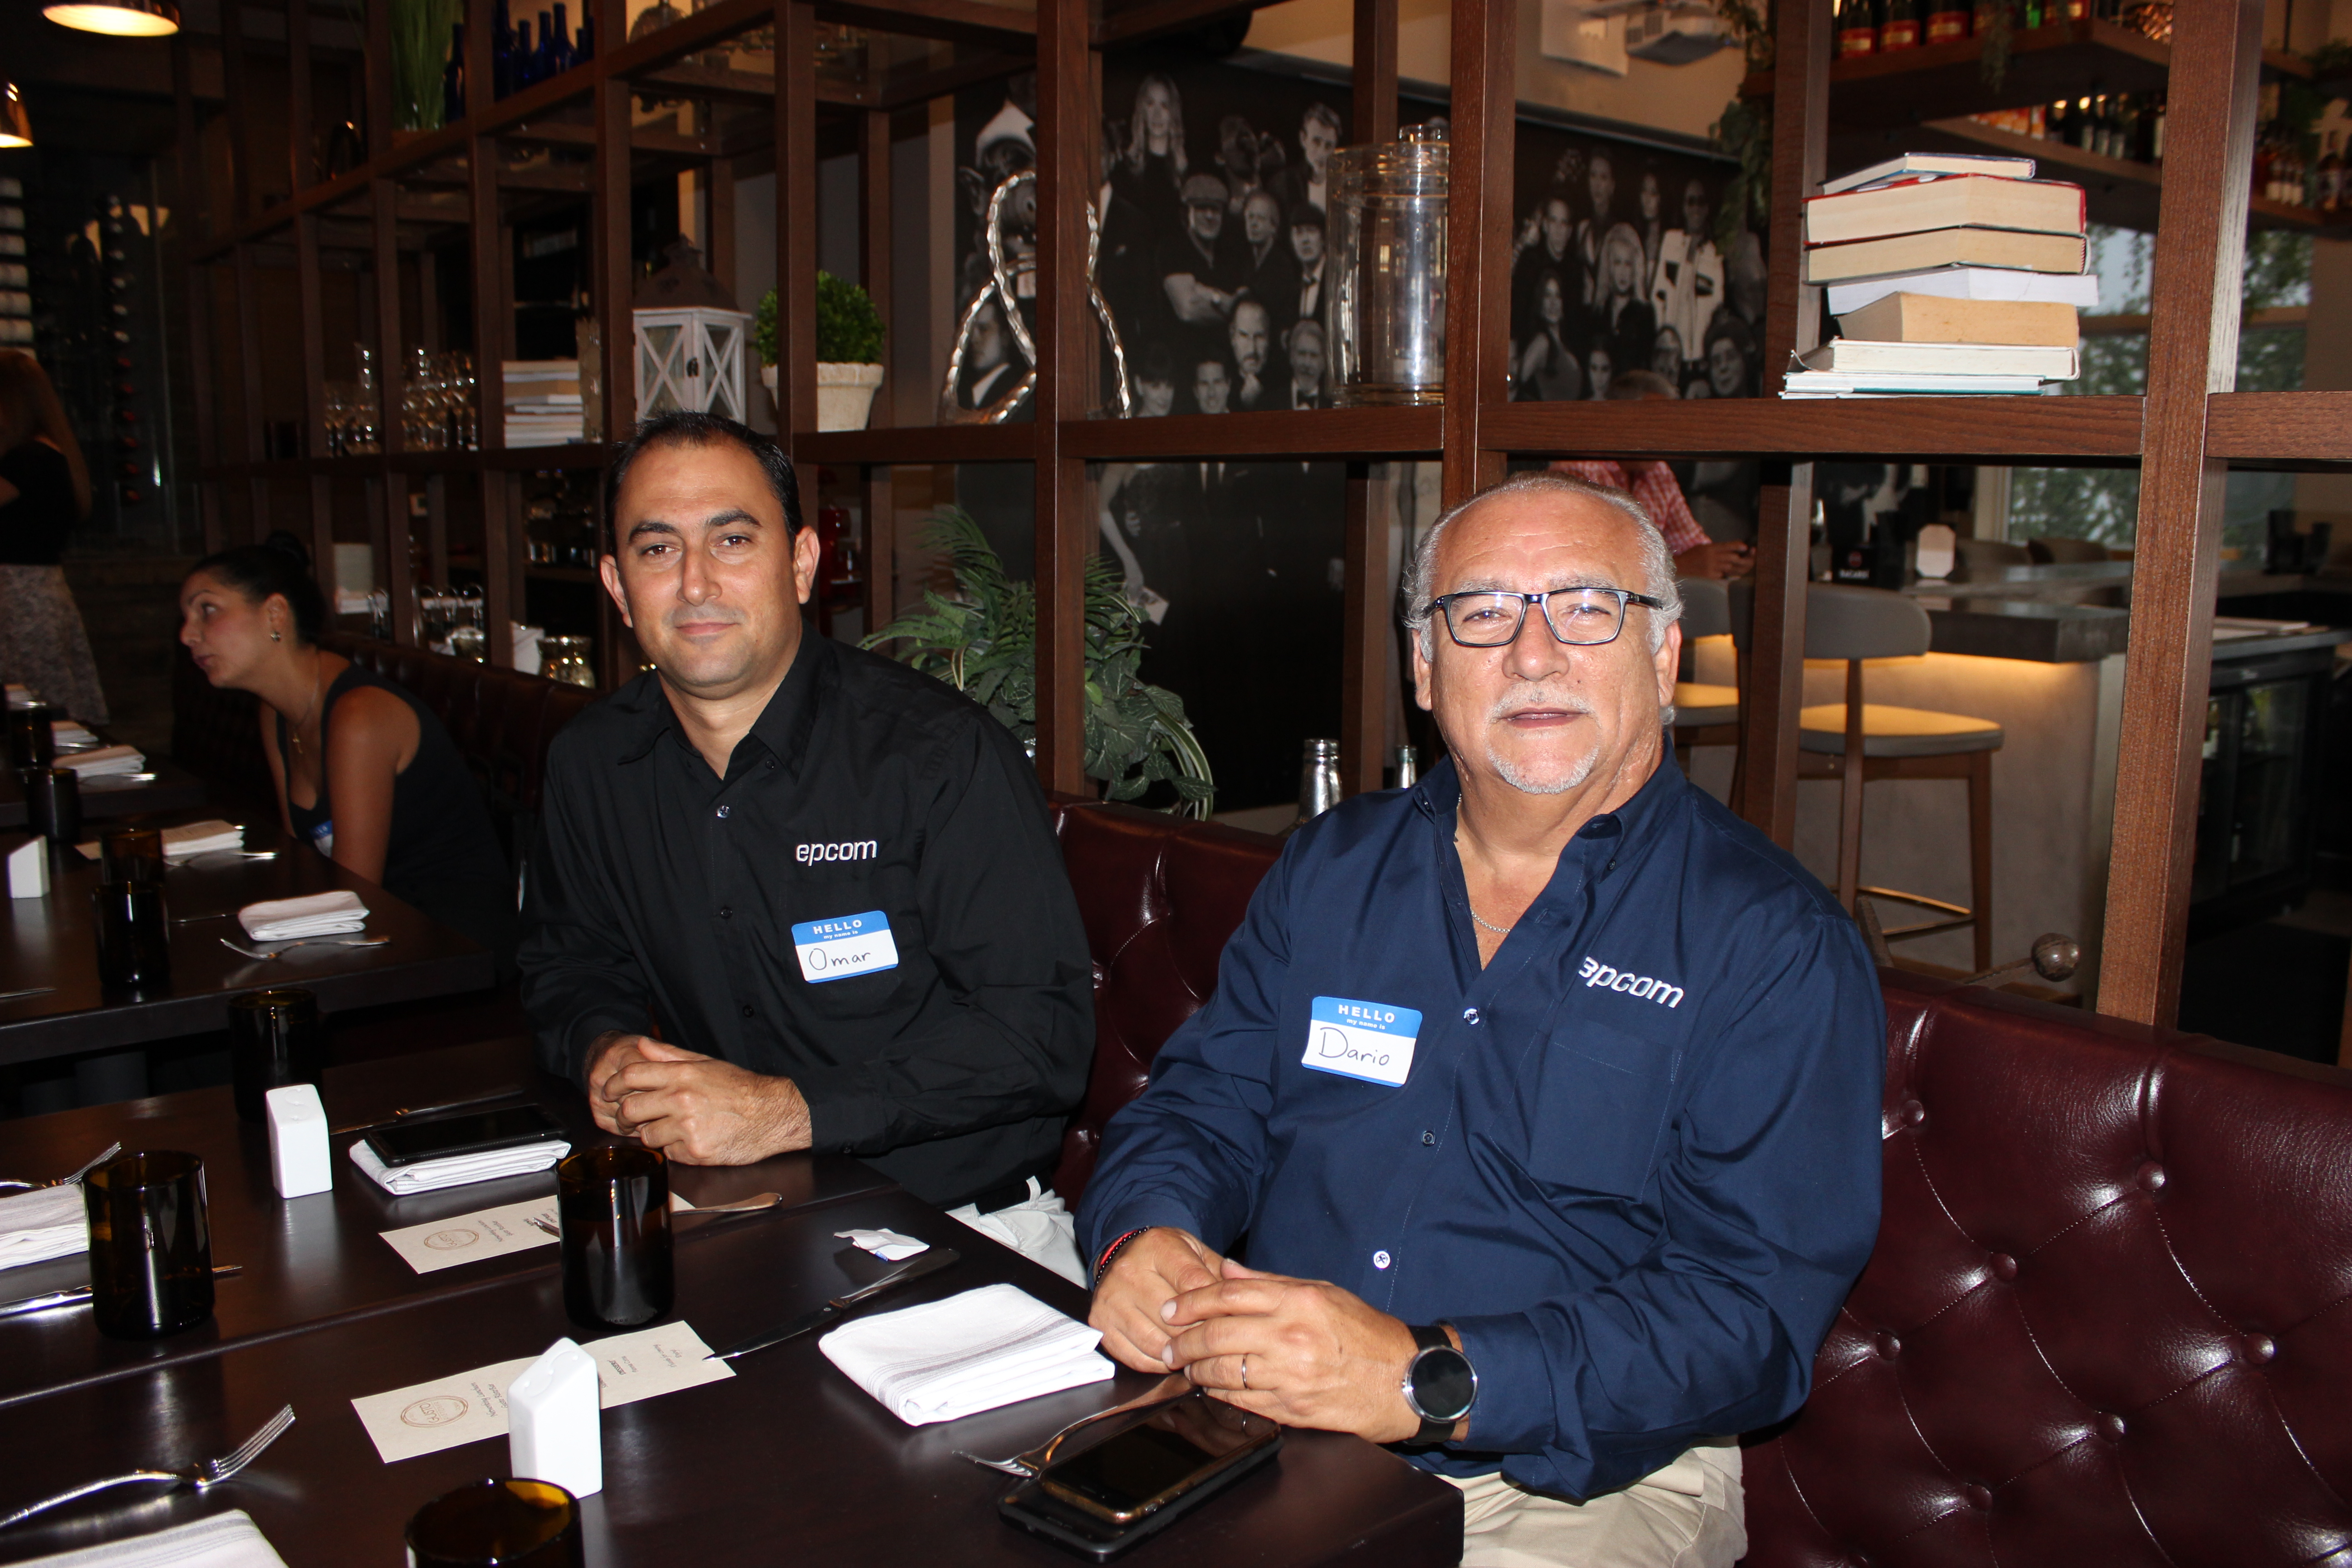 Doral Chamber of Commerce, Gusto Ristobar Luncheon two members from same company.